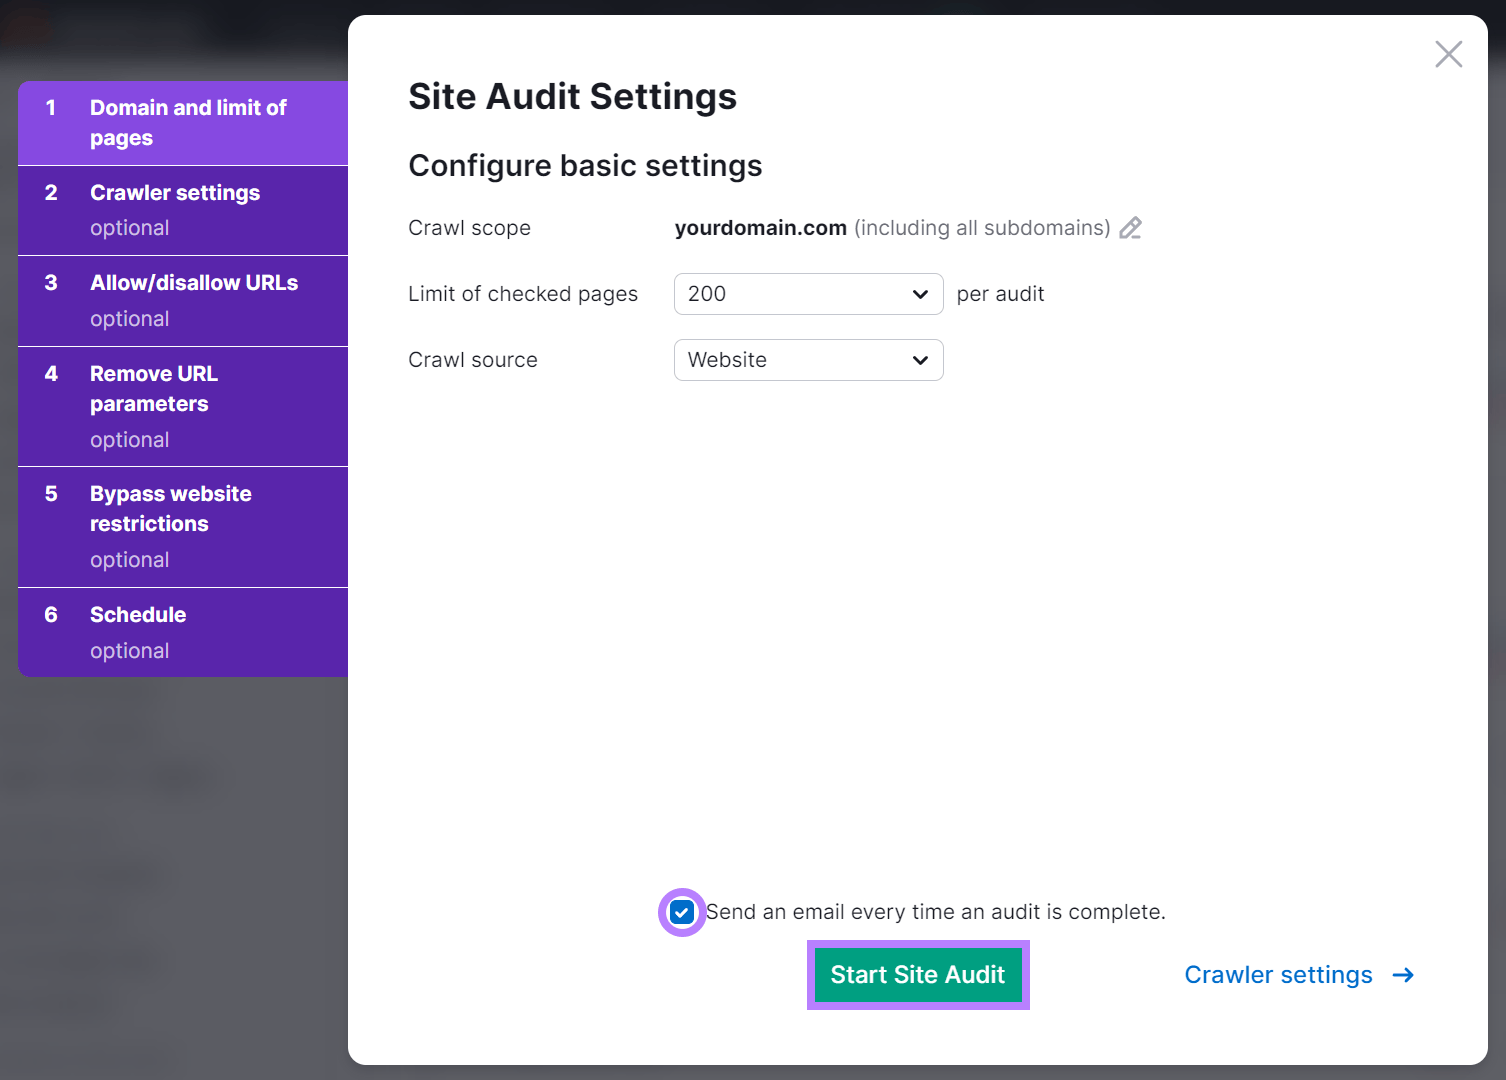 Site Audit settings popup with send email checkbox and Start Site Audit button highlighted.